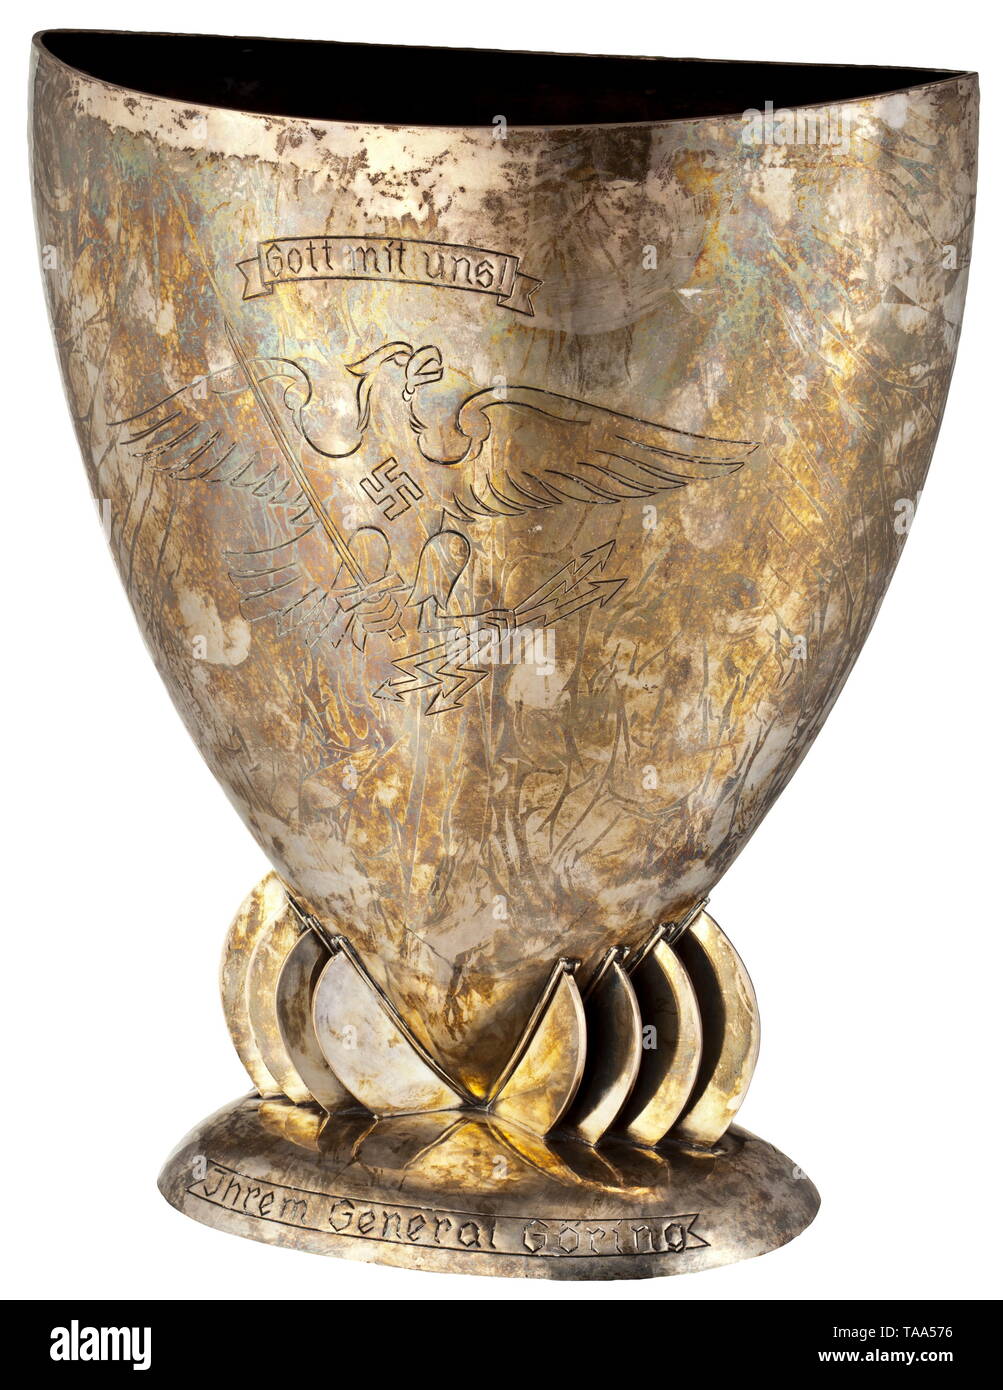 Hermann Göring - Emmy Sonnemann, a wedding present of the Prussian police force 1935 Large, hand-hammered silver vase with engraved emblem of the Prussian police with banner (tr.) 'God with us!' and the dedication inscription (tr.) 'To our General Göring - 10 April 1935 the Prussian Police'. Master mark 'HJ Wilm Berlin', master monogram 'FR', on the base the company mark 'H.J. Wilm Berlin', (tr.) 'hand beaten' and '925', height 38 cm, width 33 cm, weight 3600 g. Provenance: Keith Wilson Collection, Kansas City. Göring's wedding with the famous actress Emmy Sonnemann was one, Editorial-Use-Only Stock Photo